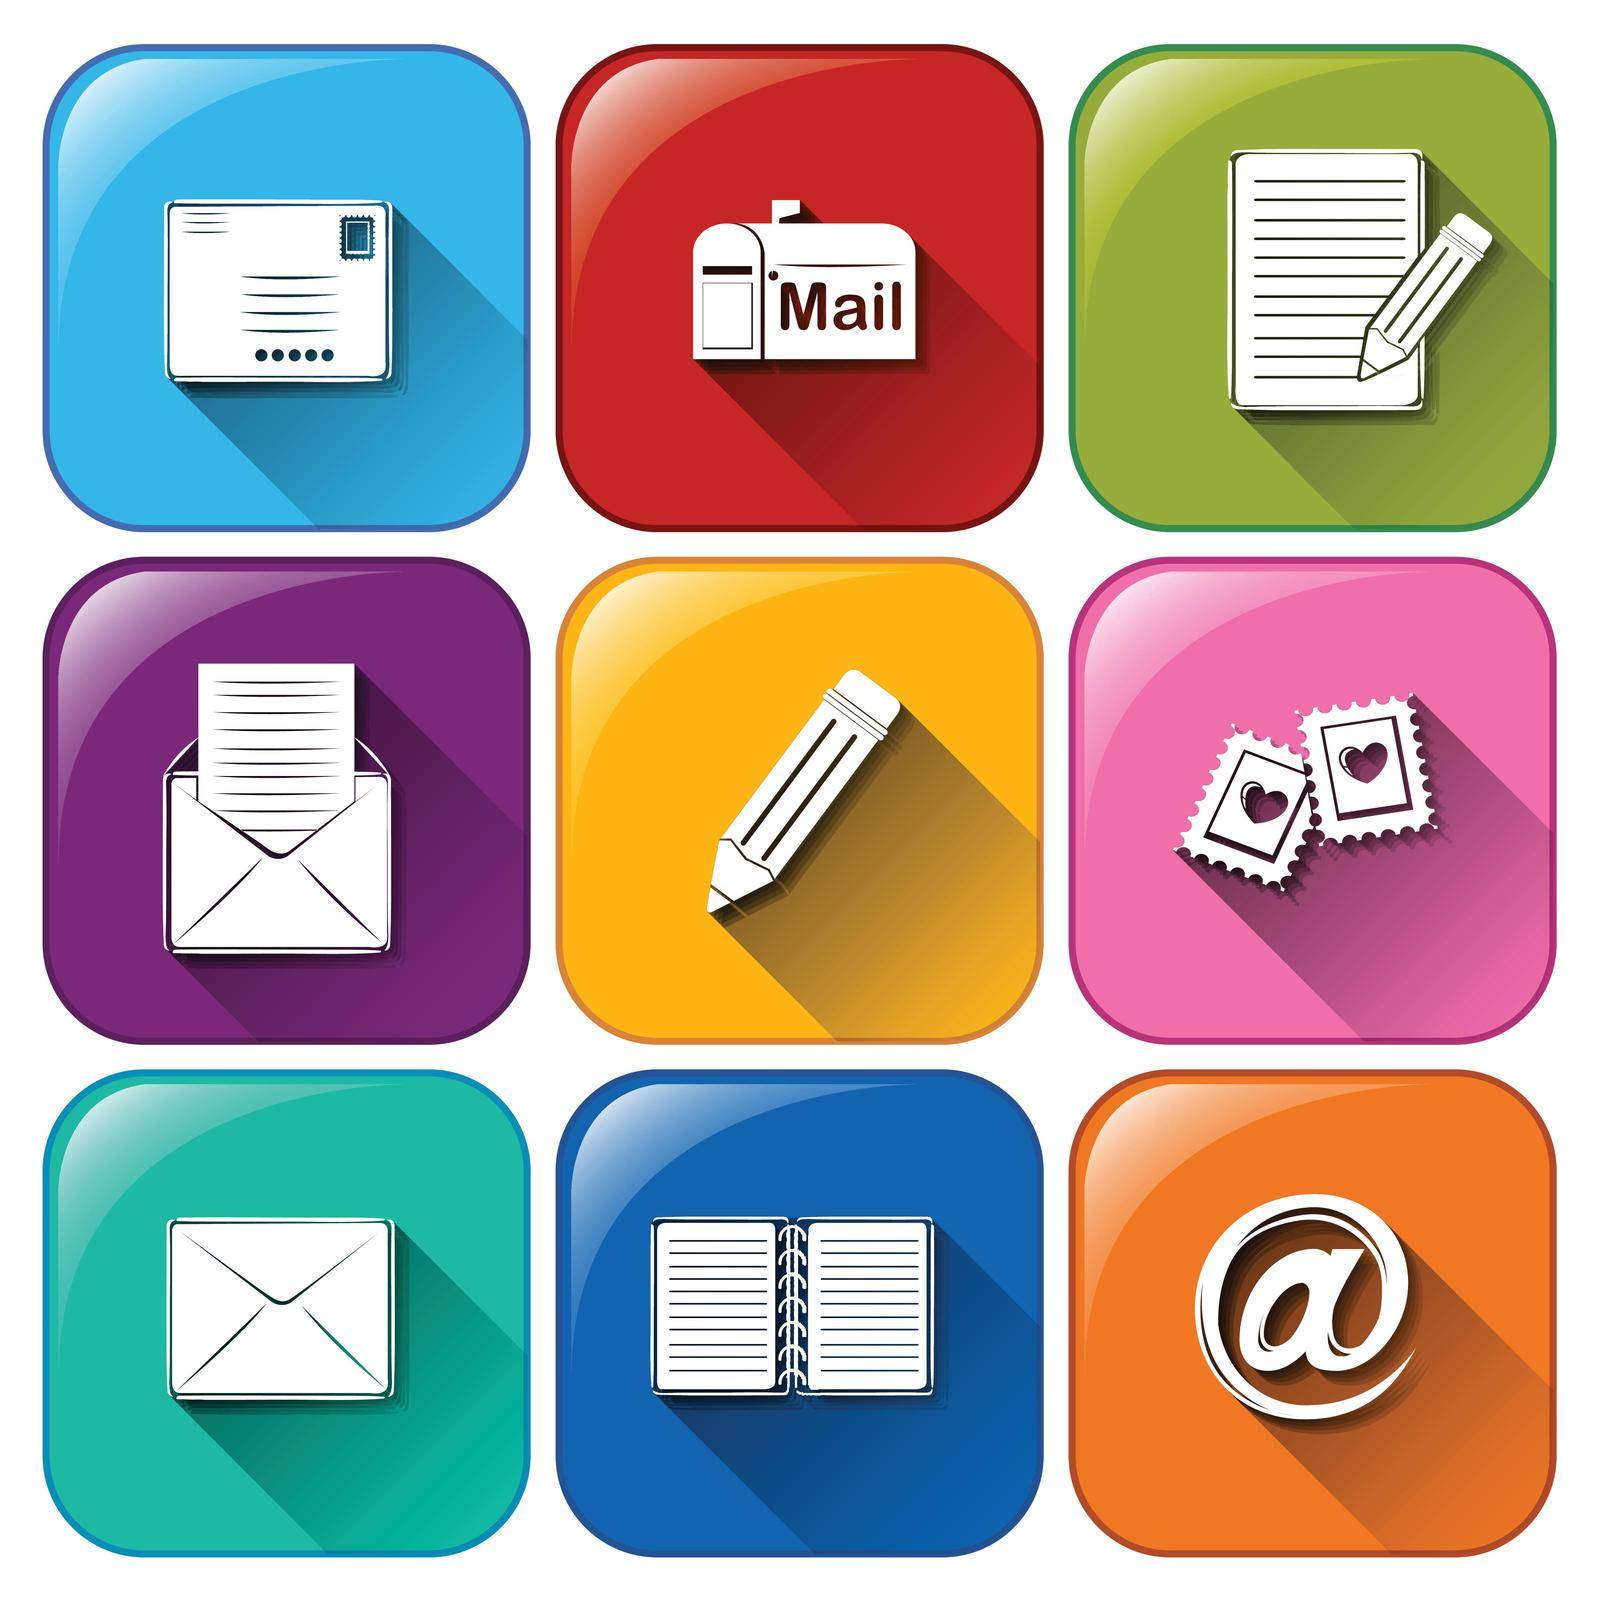 Mail icons by iimages